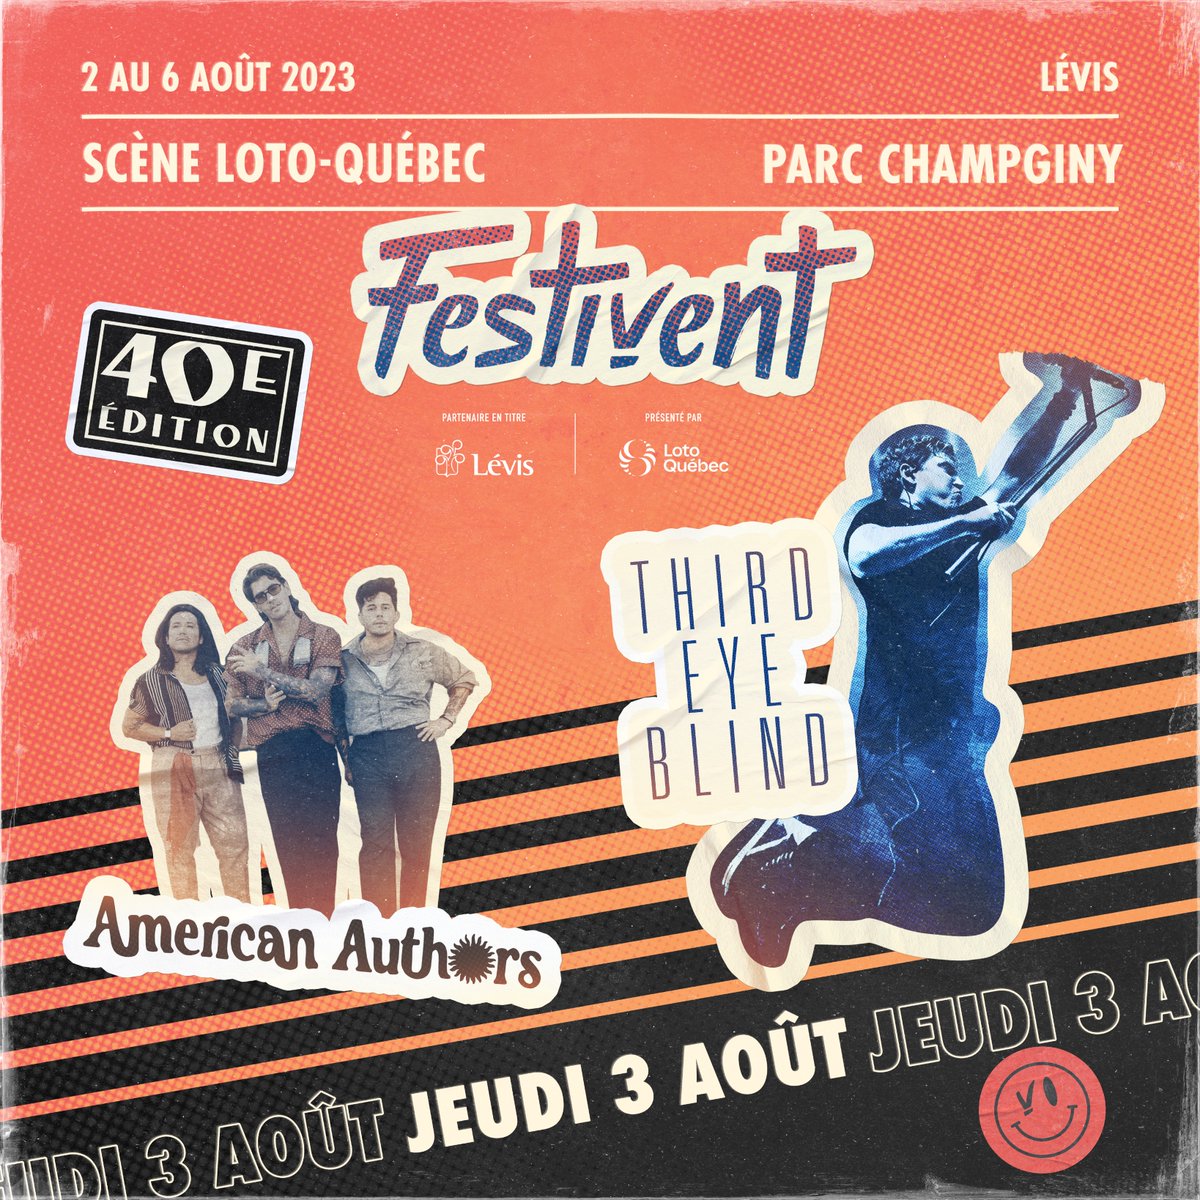 Levis, Quebec! Look out, we’re coming August 3 to play in Festivent! We are so stoked! festivent.ca/billetterie/